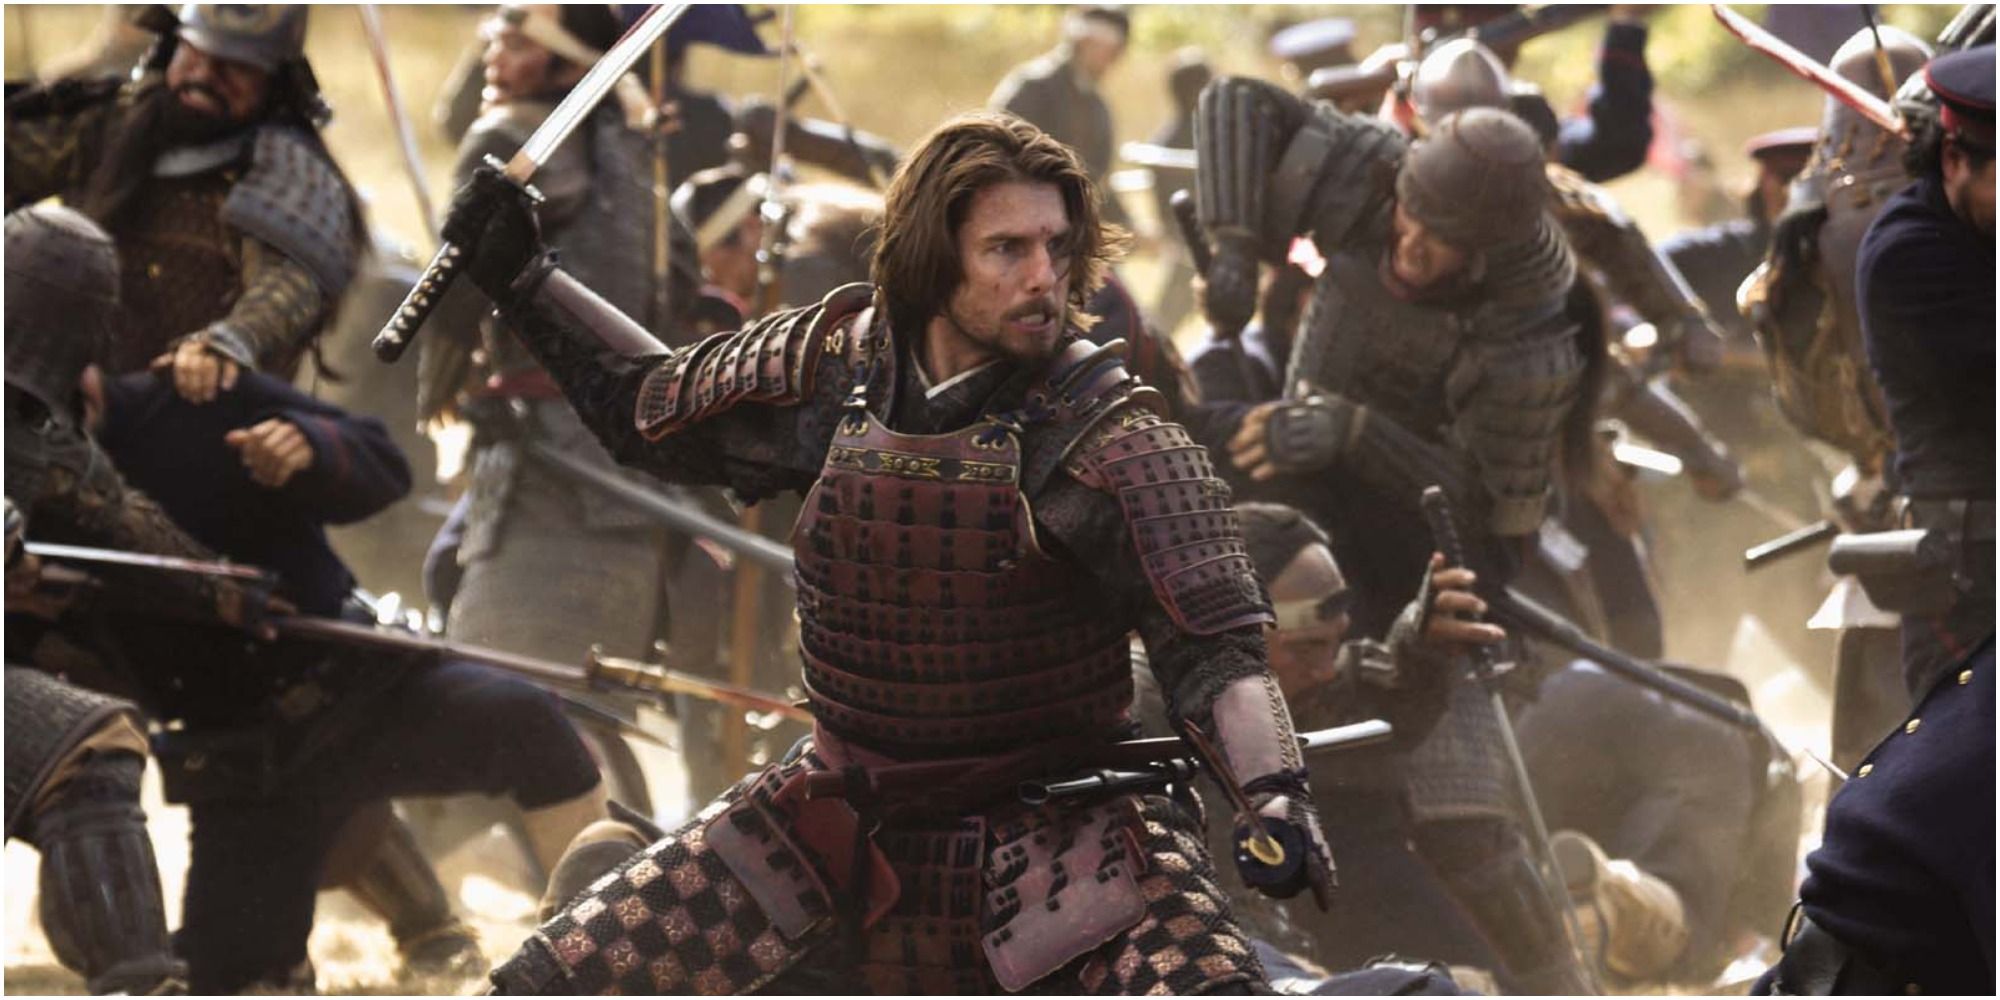 Tom Cruise in the middle of a battle in The Last Samurai